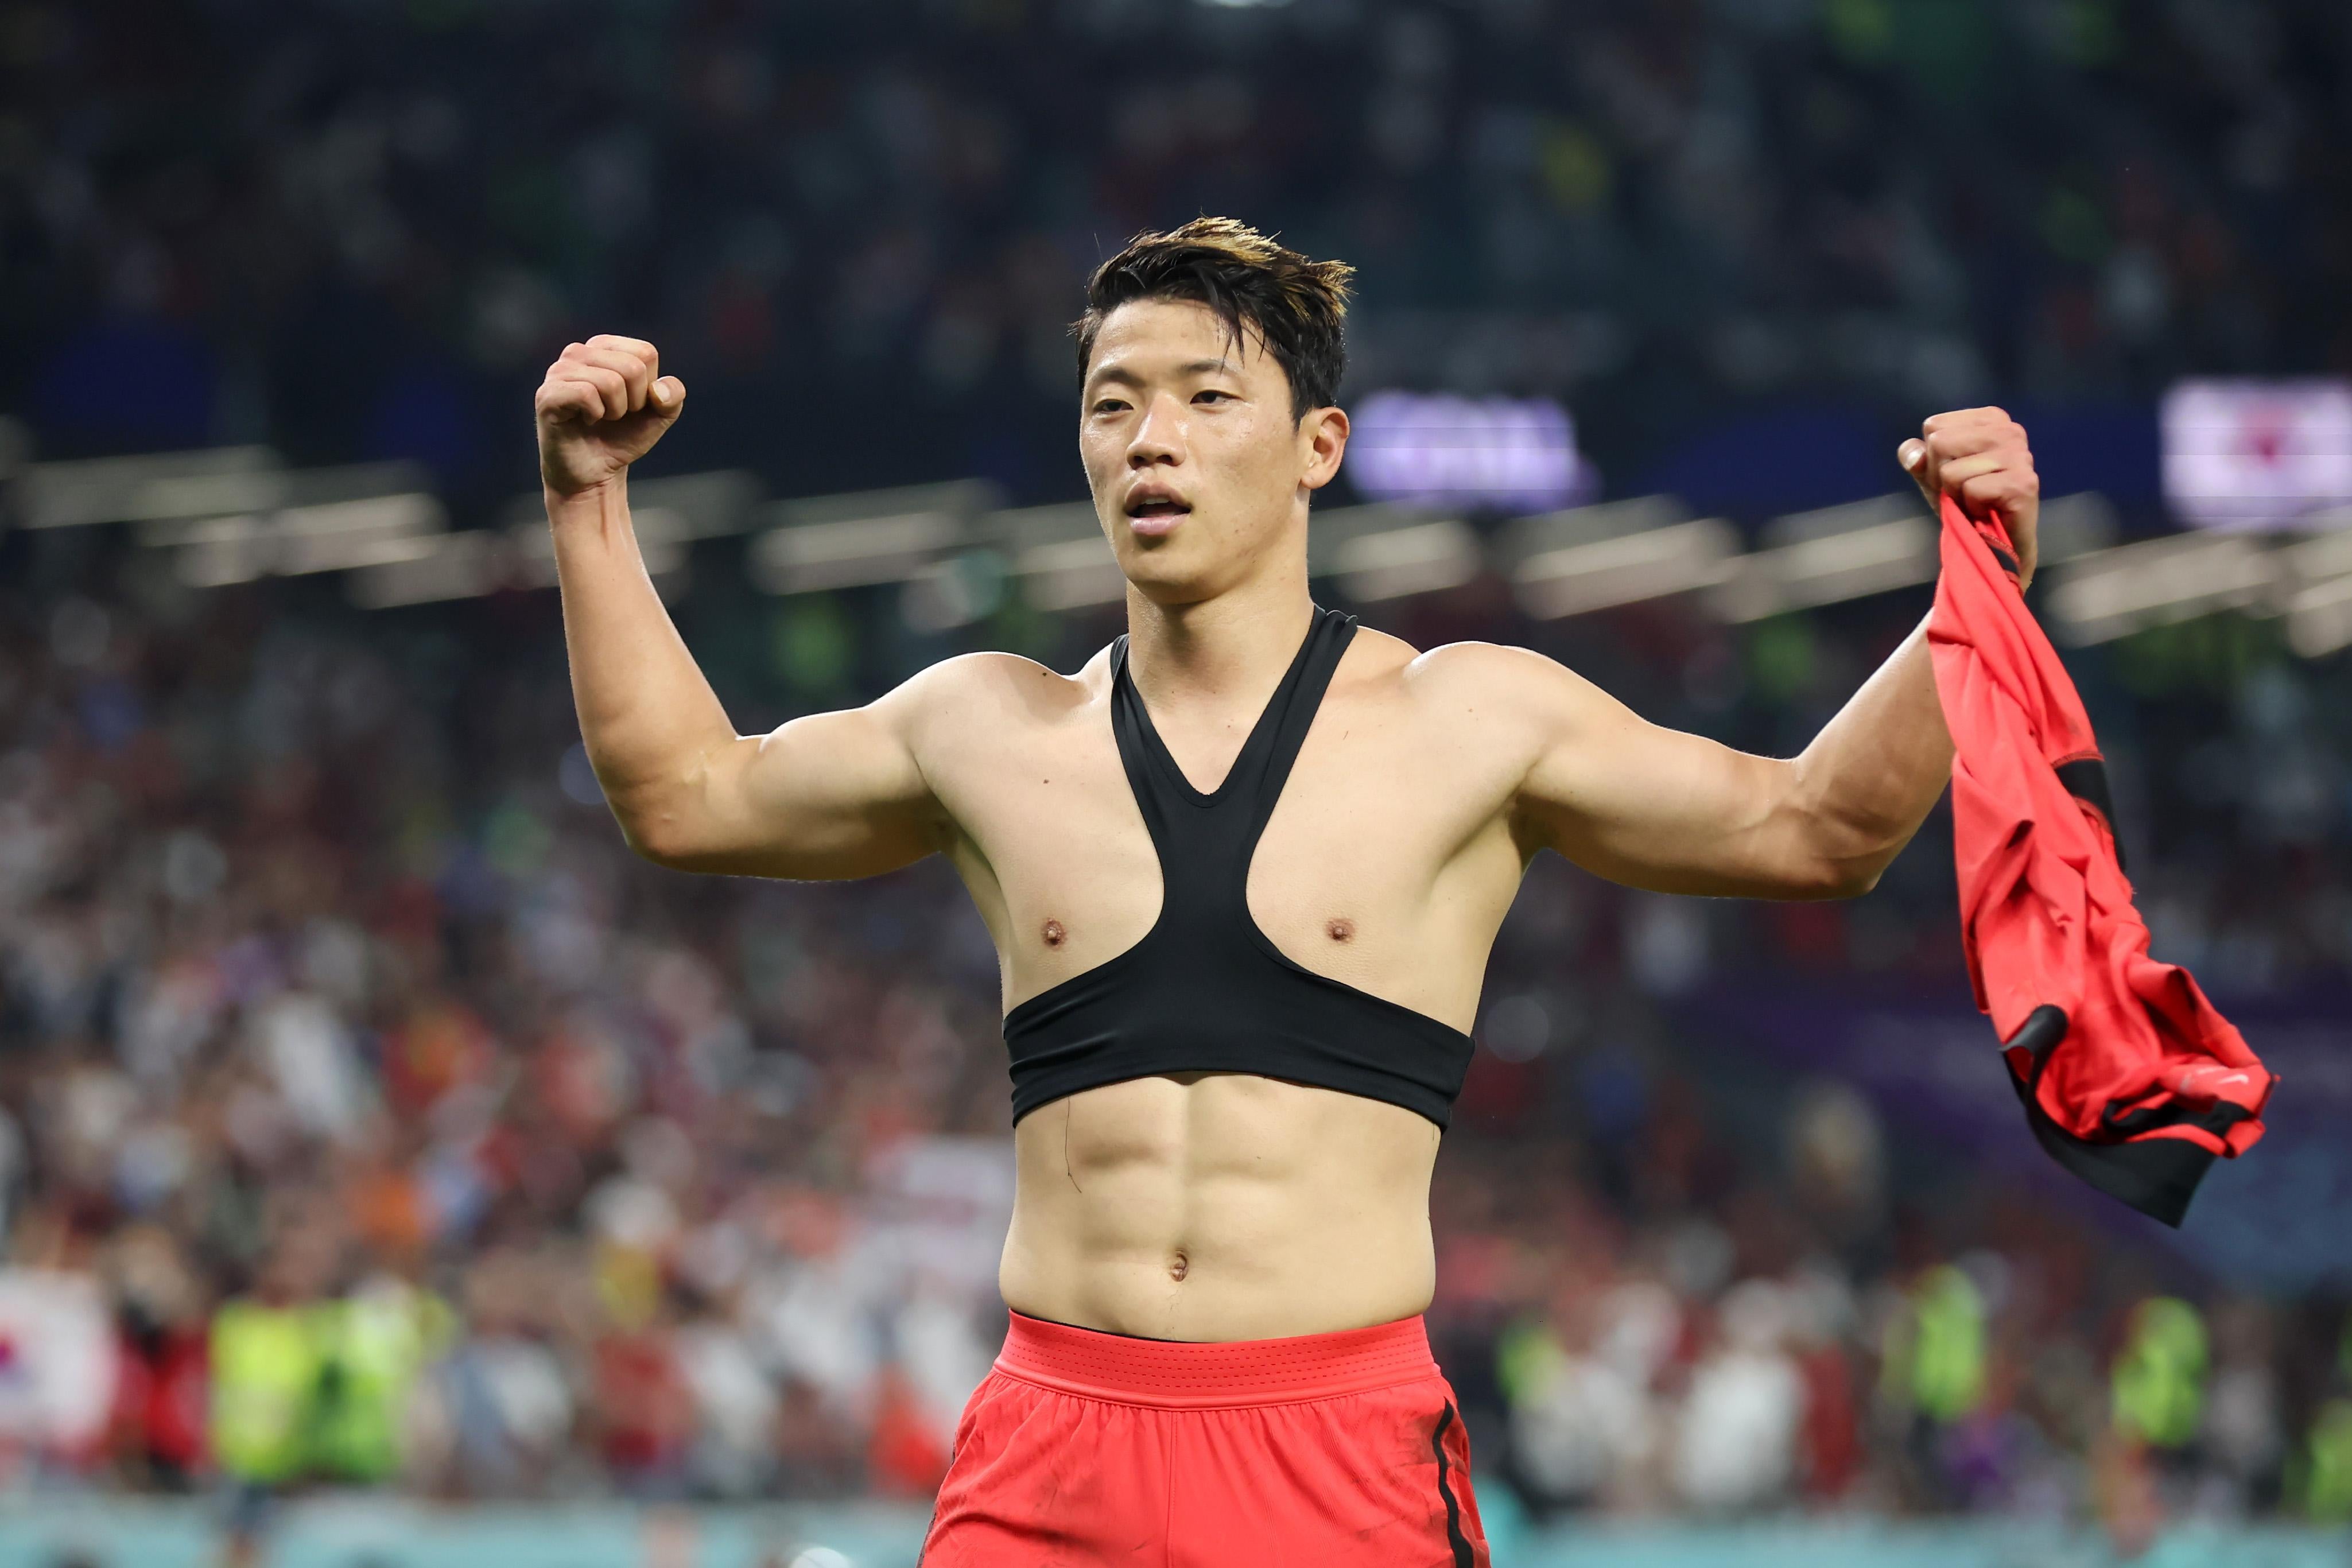 A Korean soccer player poses with his shirt off after scoring a crucial goal, wearing what appears to be some kind of harness or sports bra.